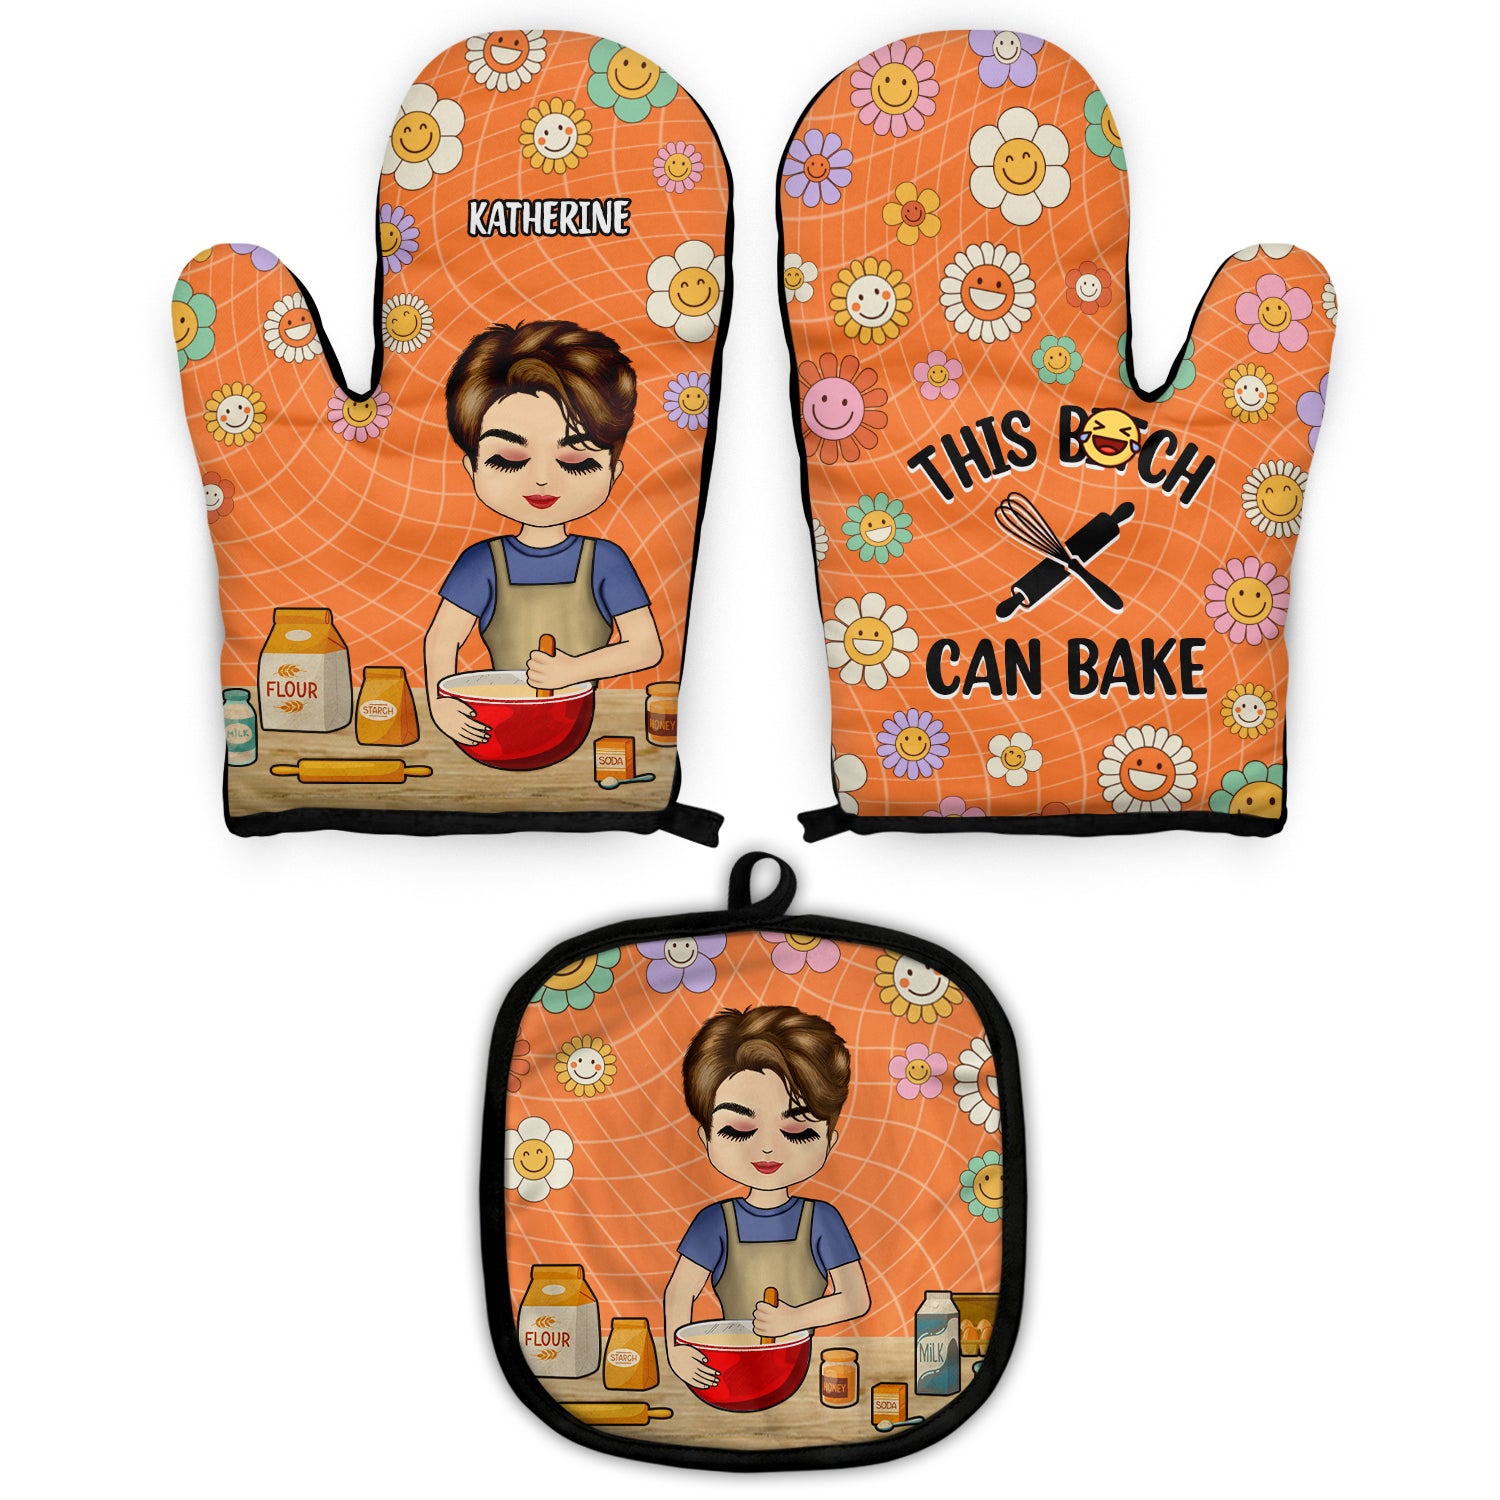 This Can Bake - Gift For Mother, Gift For Bakers - Personalized Oven Mitts, Pot Holders